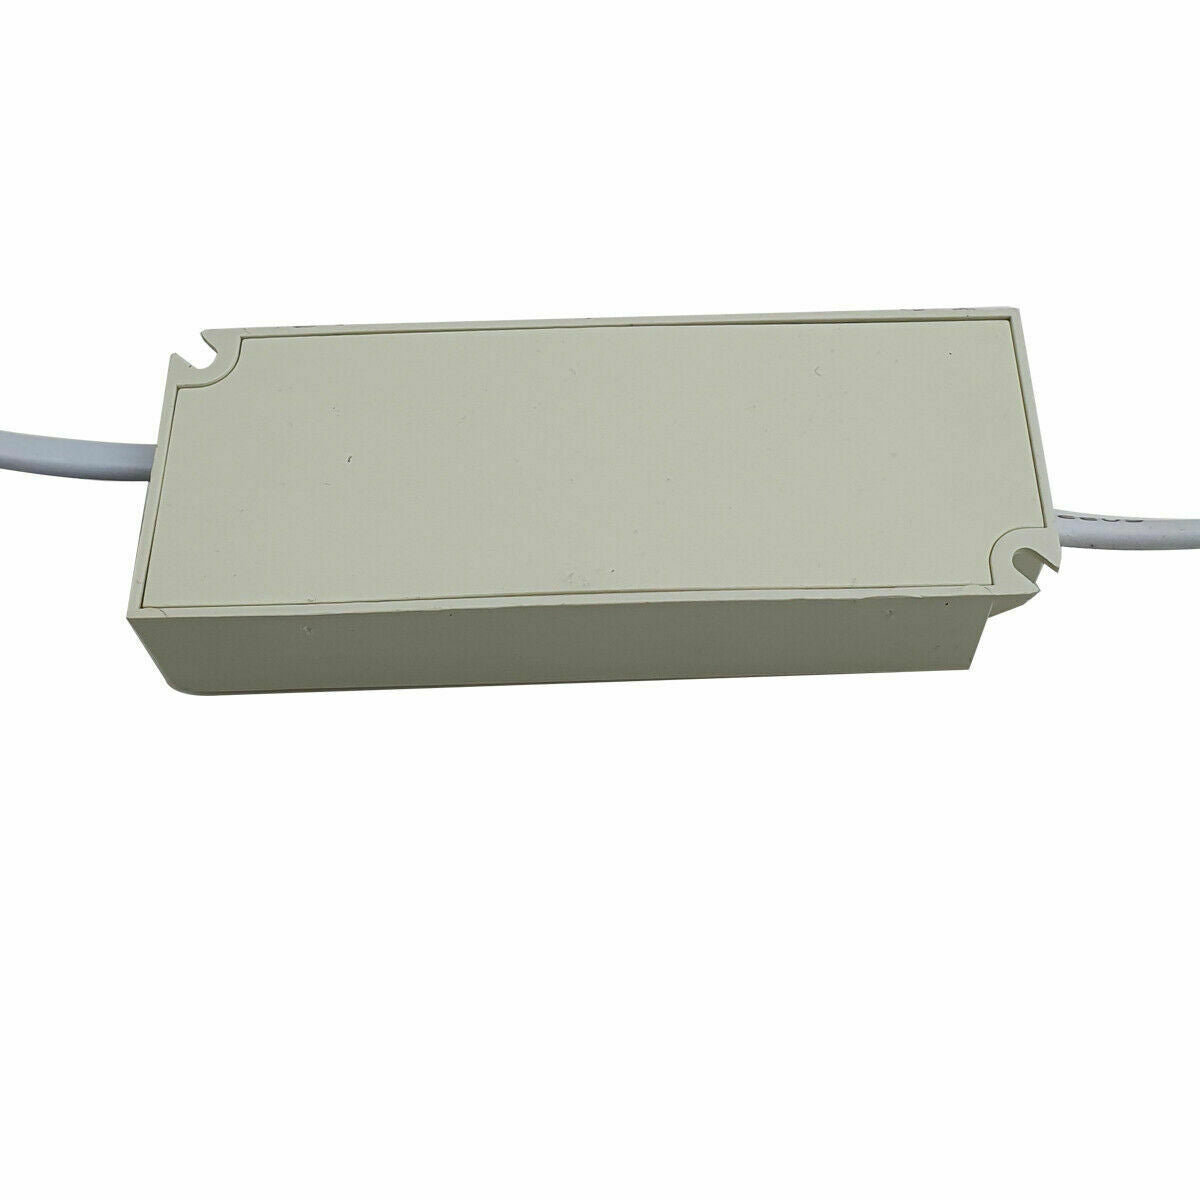 Constant Current 600mA High Power DC Connector Power Supply LED Ceiling light~1061 - LEDSone UK Ltd